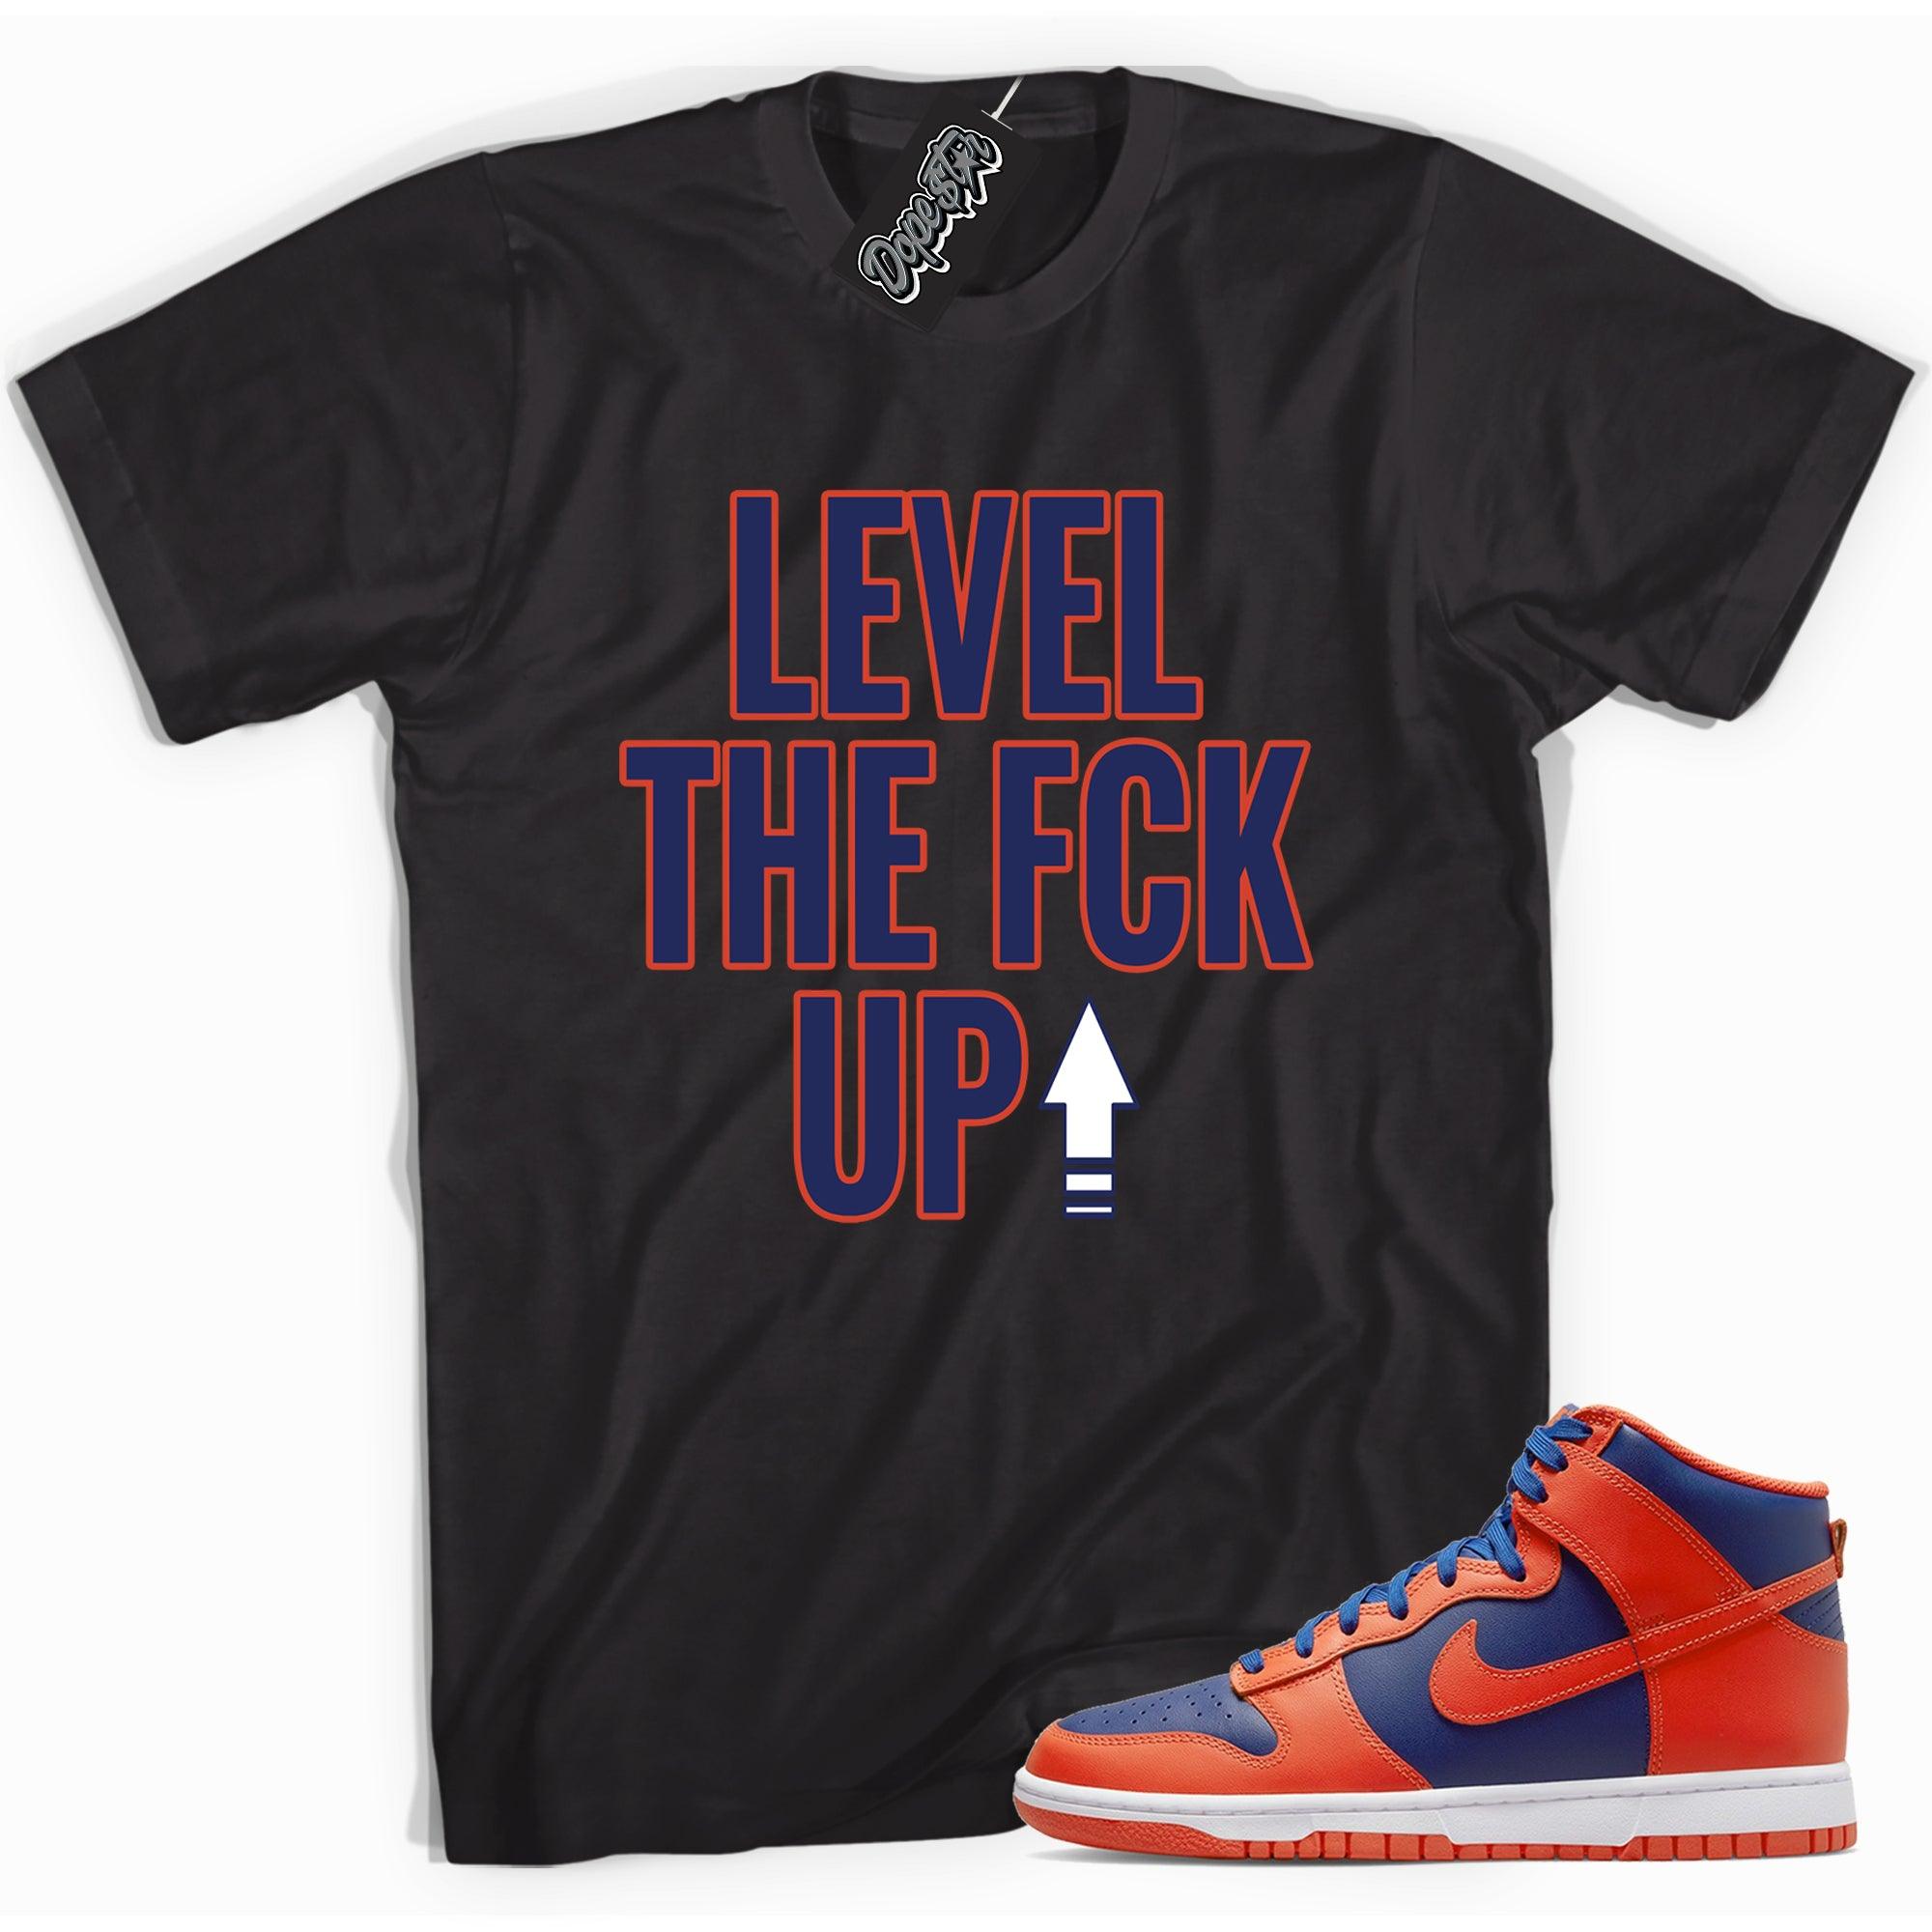 Cool black graphic tee with 'Level Up' print, that perfectly matches Nike Dunk High Knicks sneakers.